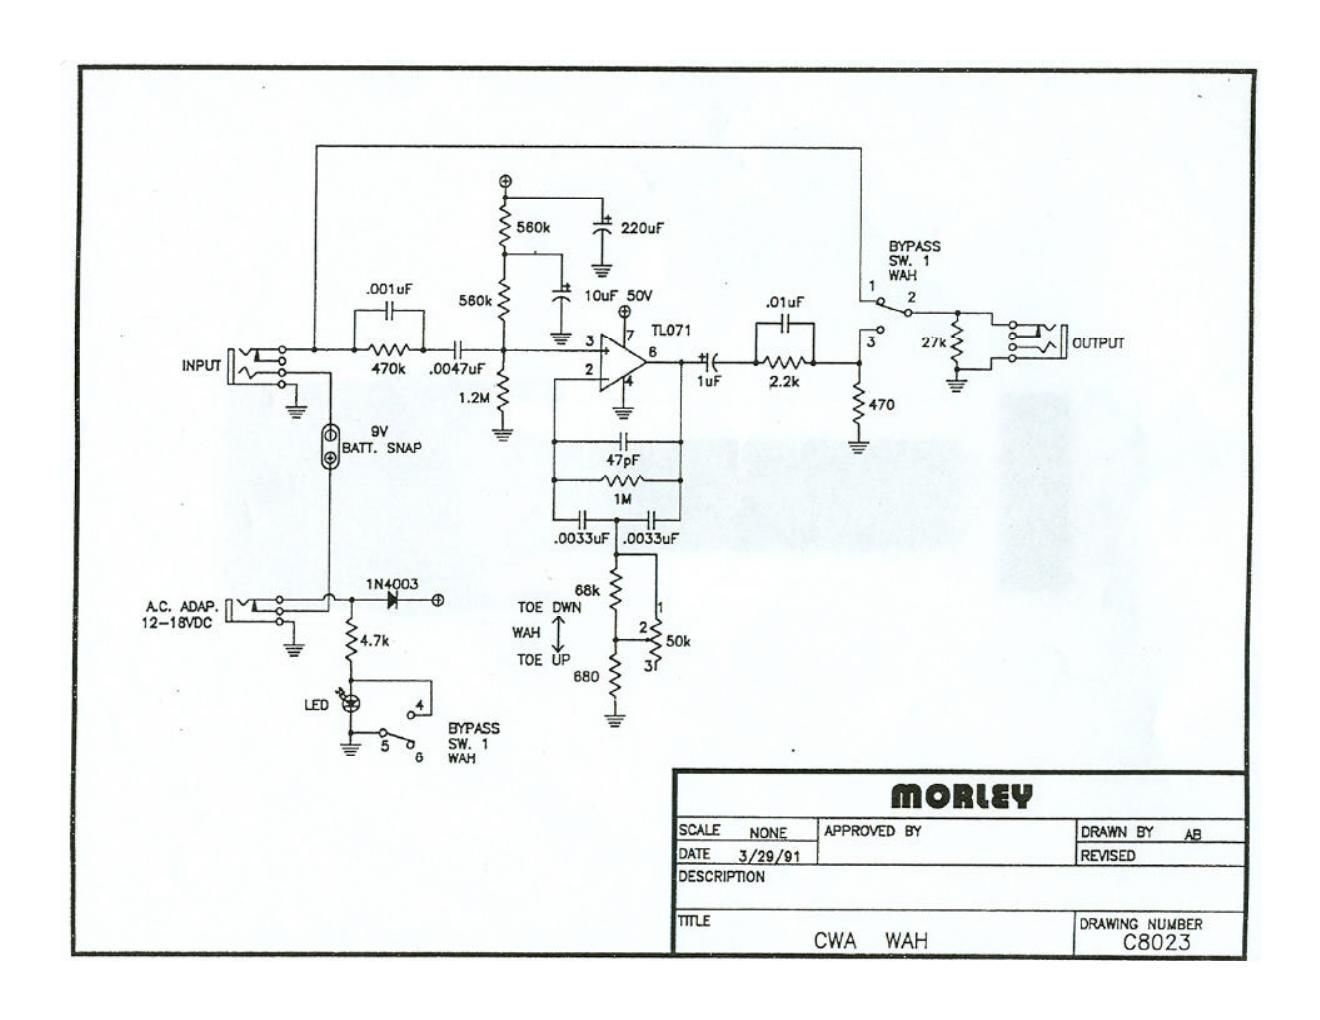 Morley CWA Compact Wah Schematic